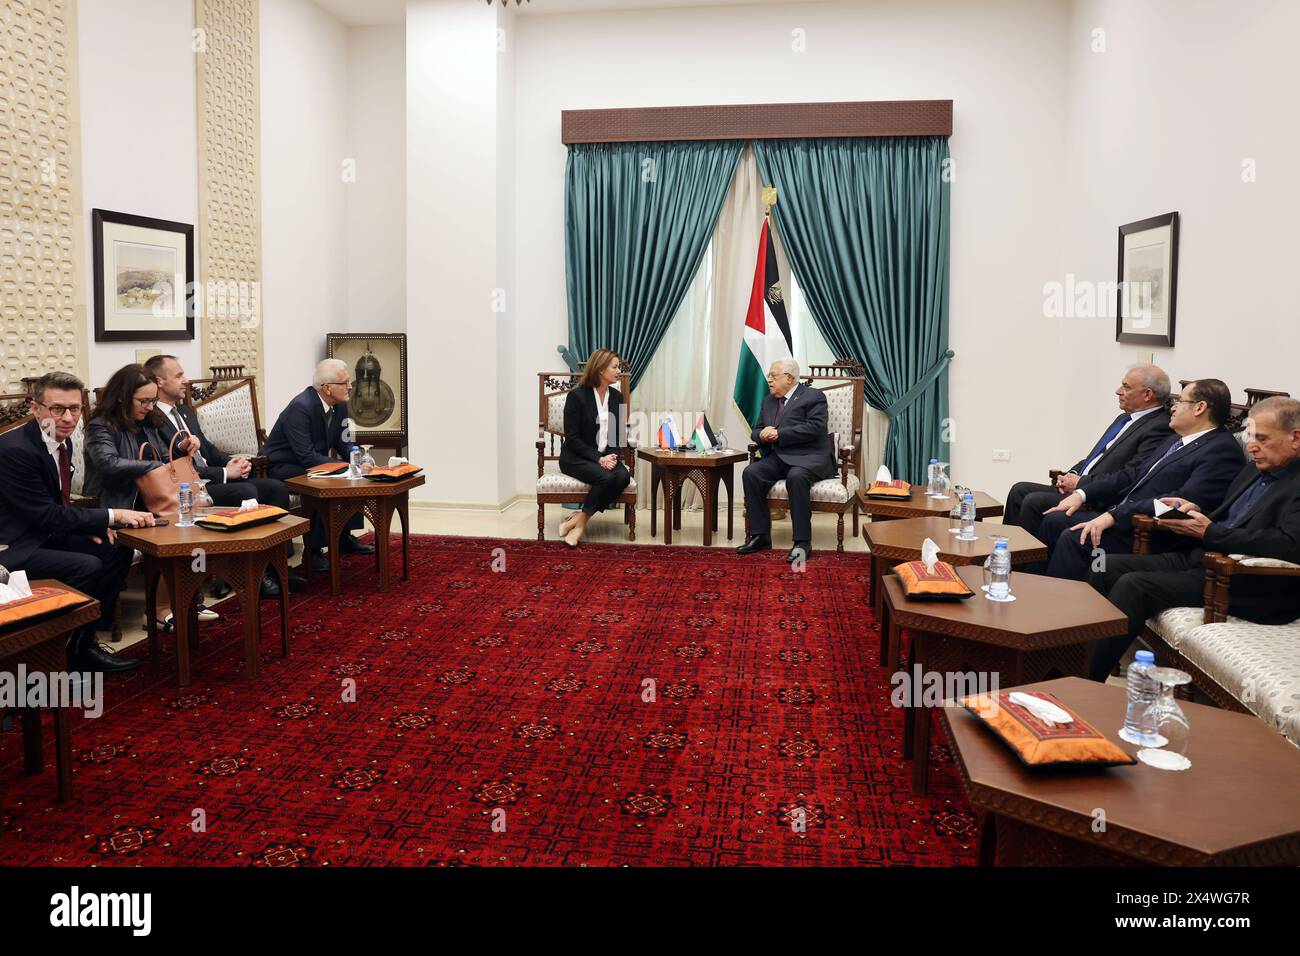 Palestinian President Mahmoud Abbas Abu Mazen meets with the Minister of Foreign Affairs of Slovenia Palestinian President Mahmoud Abbas Abu Mazen meets with the Minister of Foreign Affairs of Slovenia, Tanja Fajon, in Ramallah, on May 05, 2024. Photo by Thaer Ganaim apaimages Ramallah West Bank Palestinian Territory 050524 Ramallah PPO 003 Copyright: xapaimagesxThaerxGanaimxxapaimagesx Stock Photo